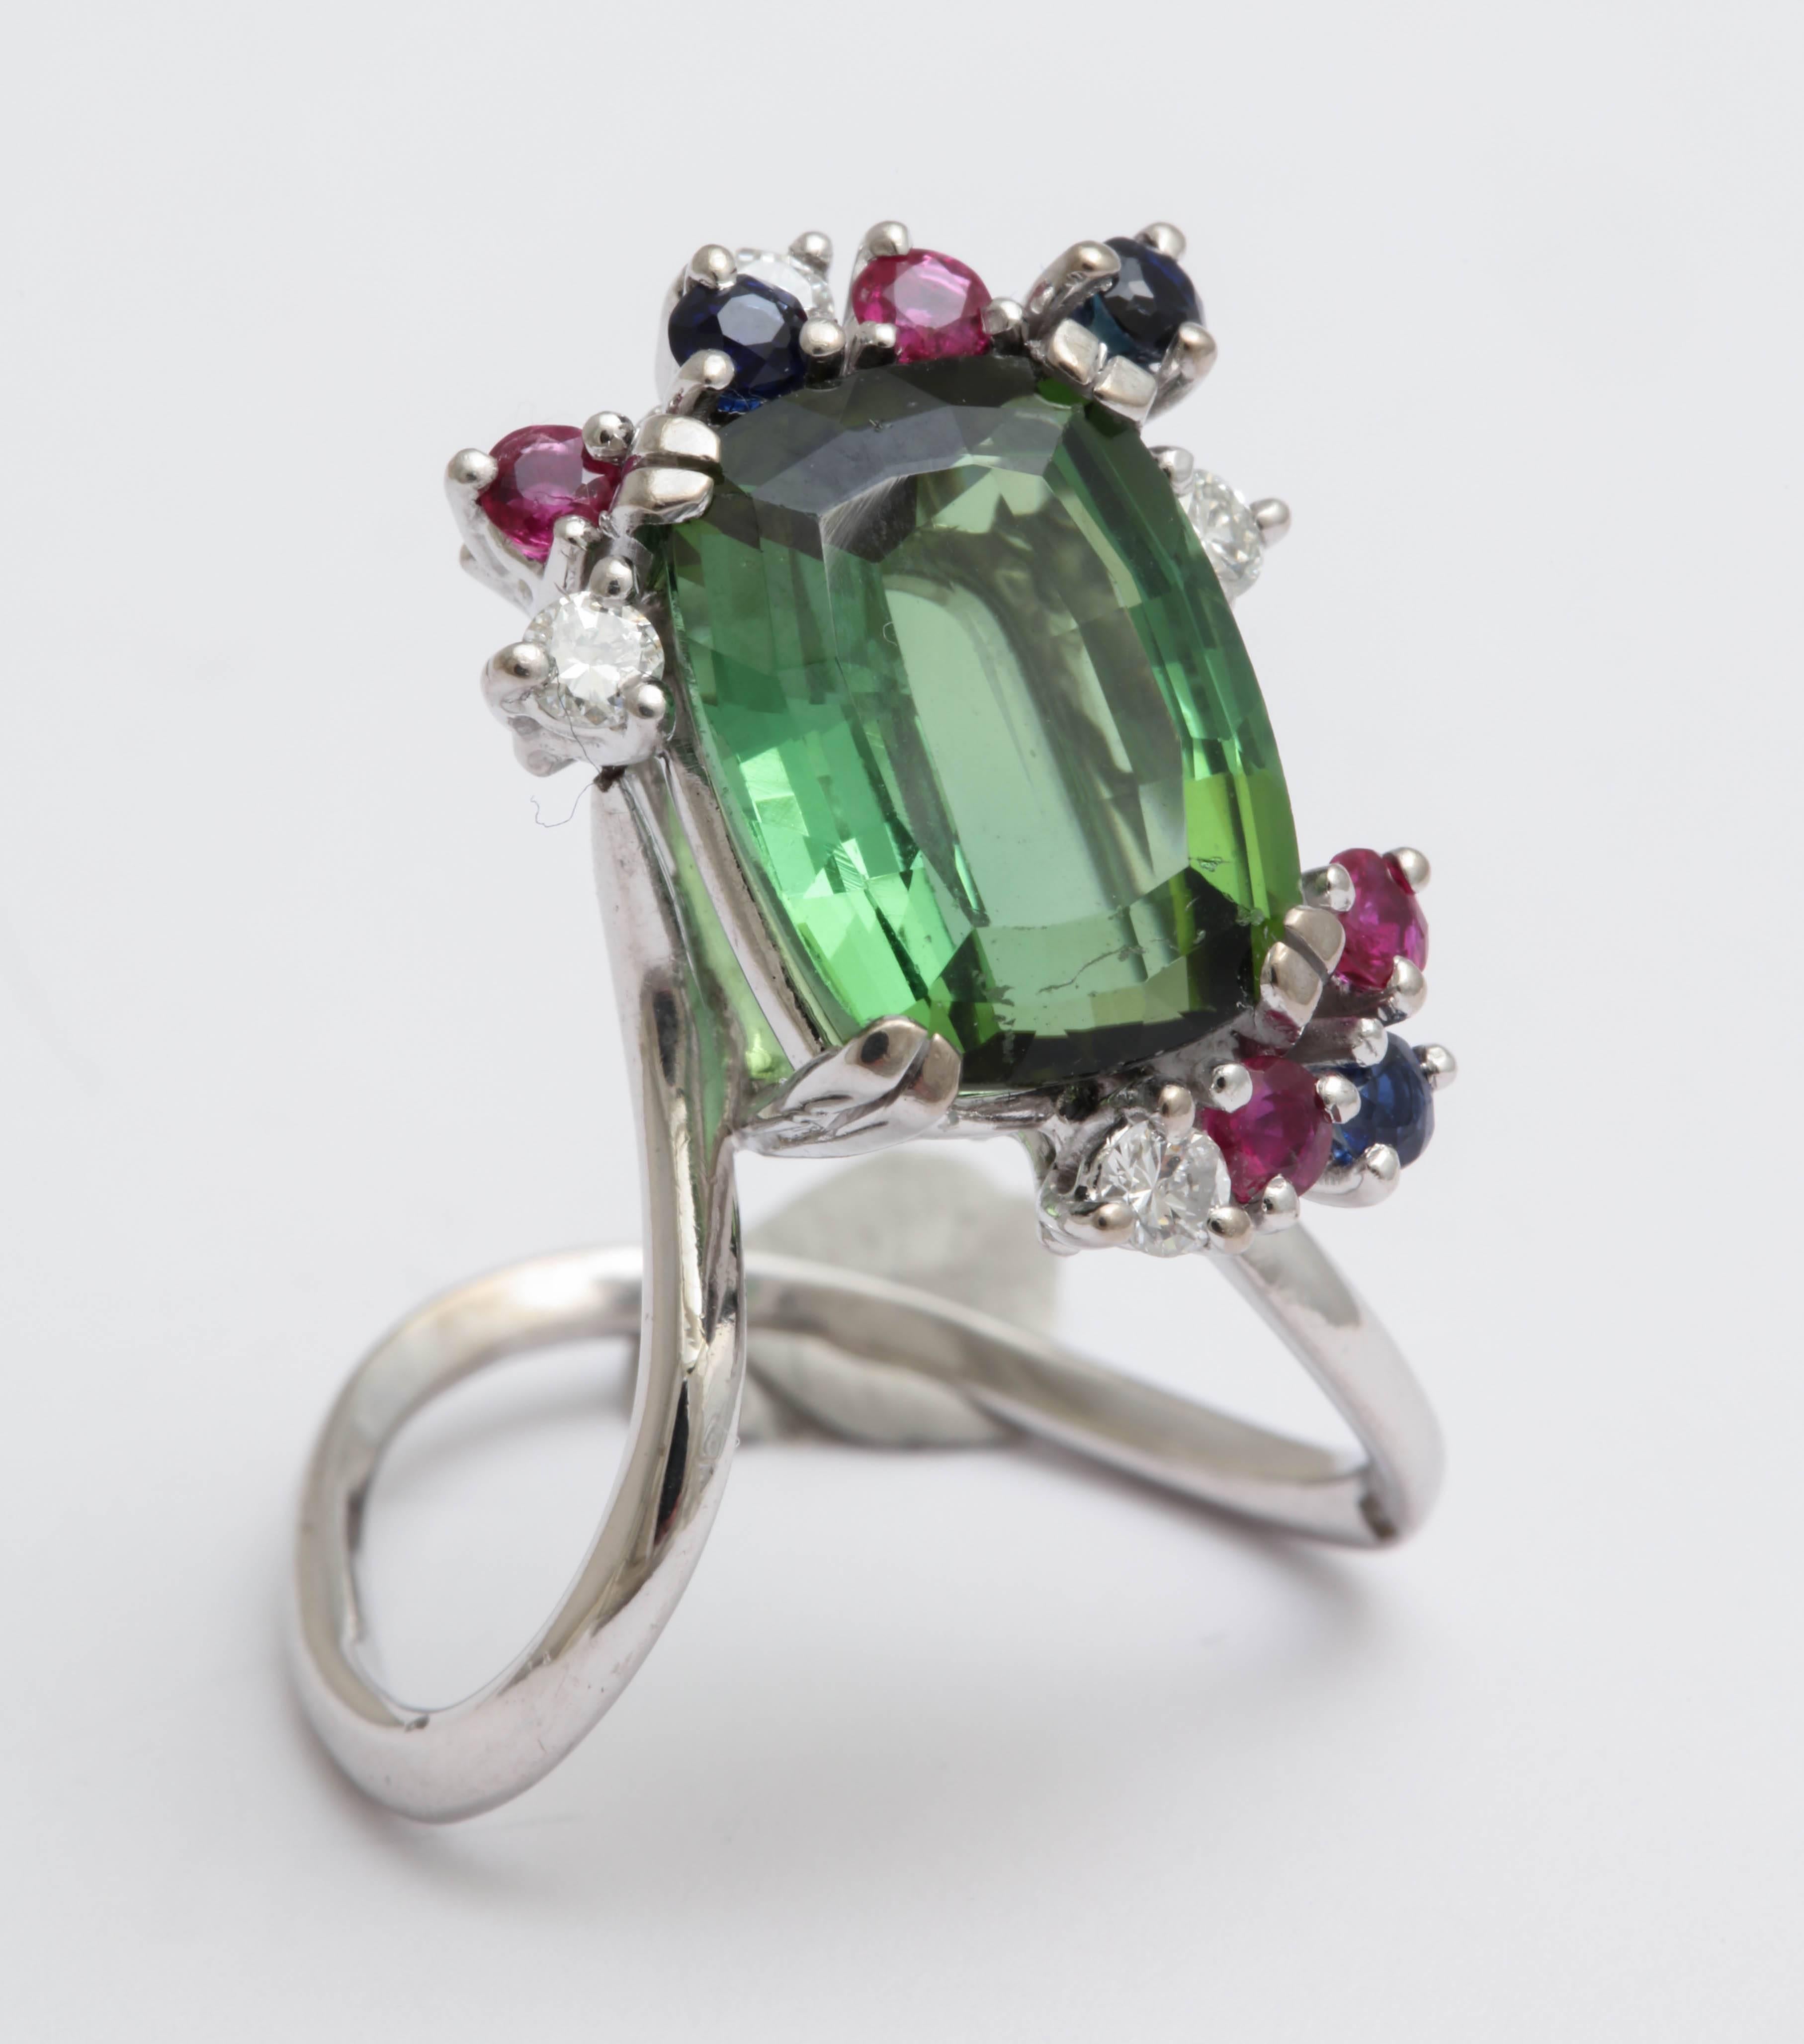 Modernist 18kt white gold Ring set with a faceted cushion cut Green Tourmaline and edged with Rubies, Diamonds and Sapphires.  Superb quality stones and unusual design.  Signed with the Stern trademark.  Tourmaline 13mmx10x6mm  